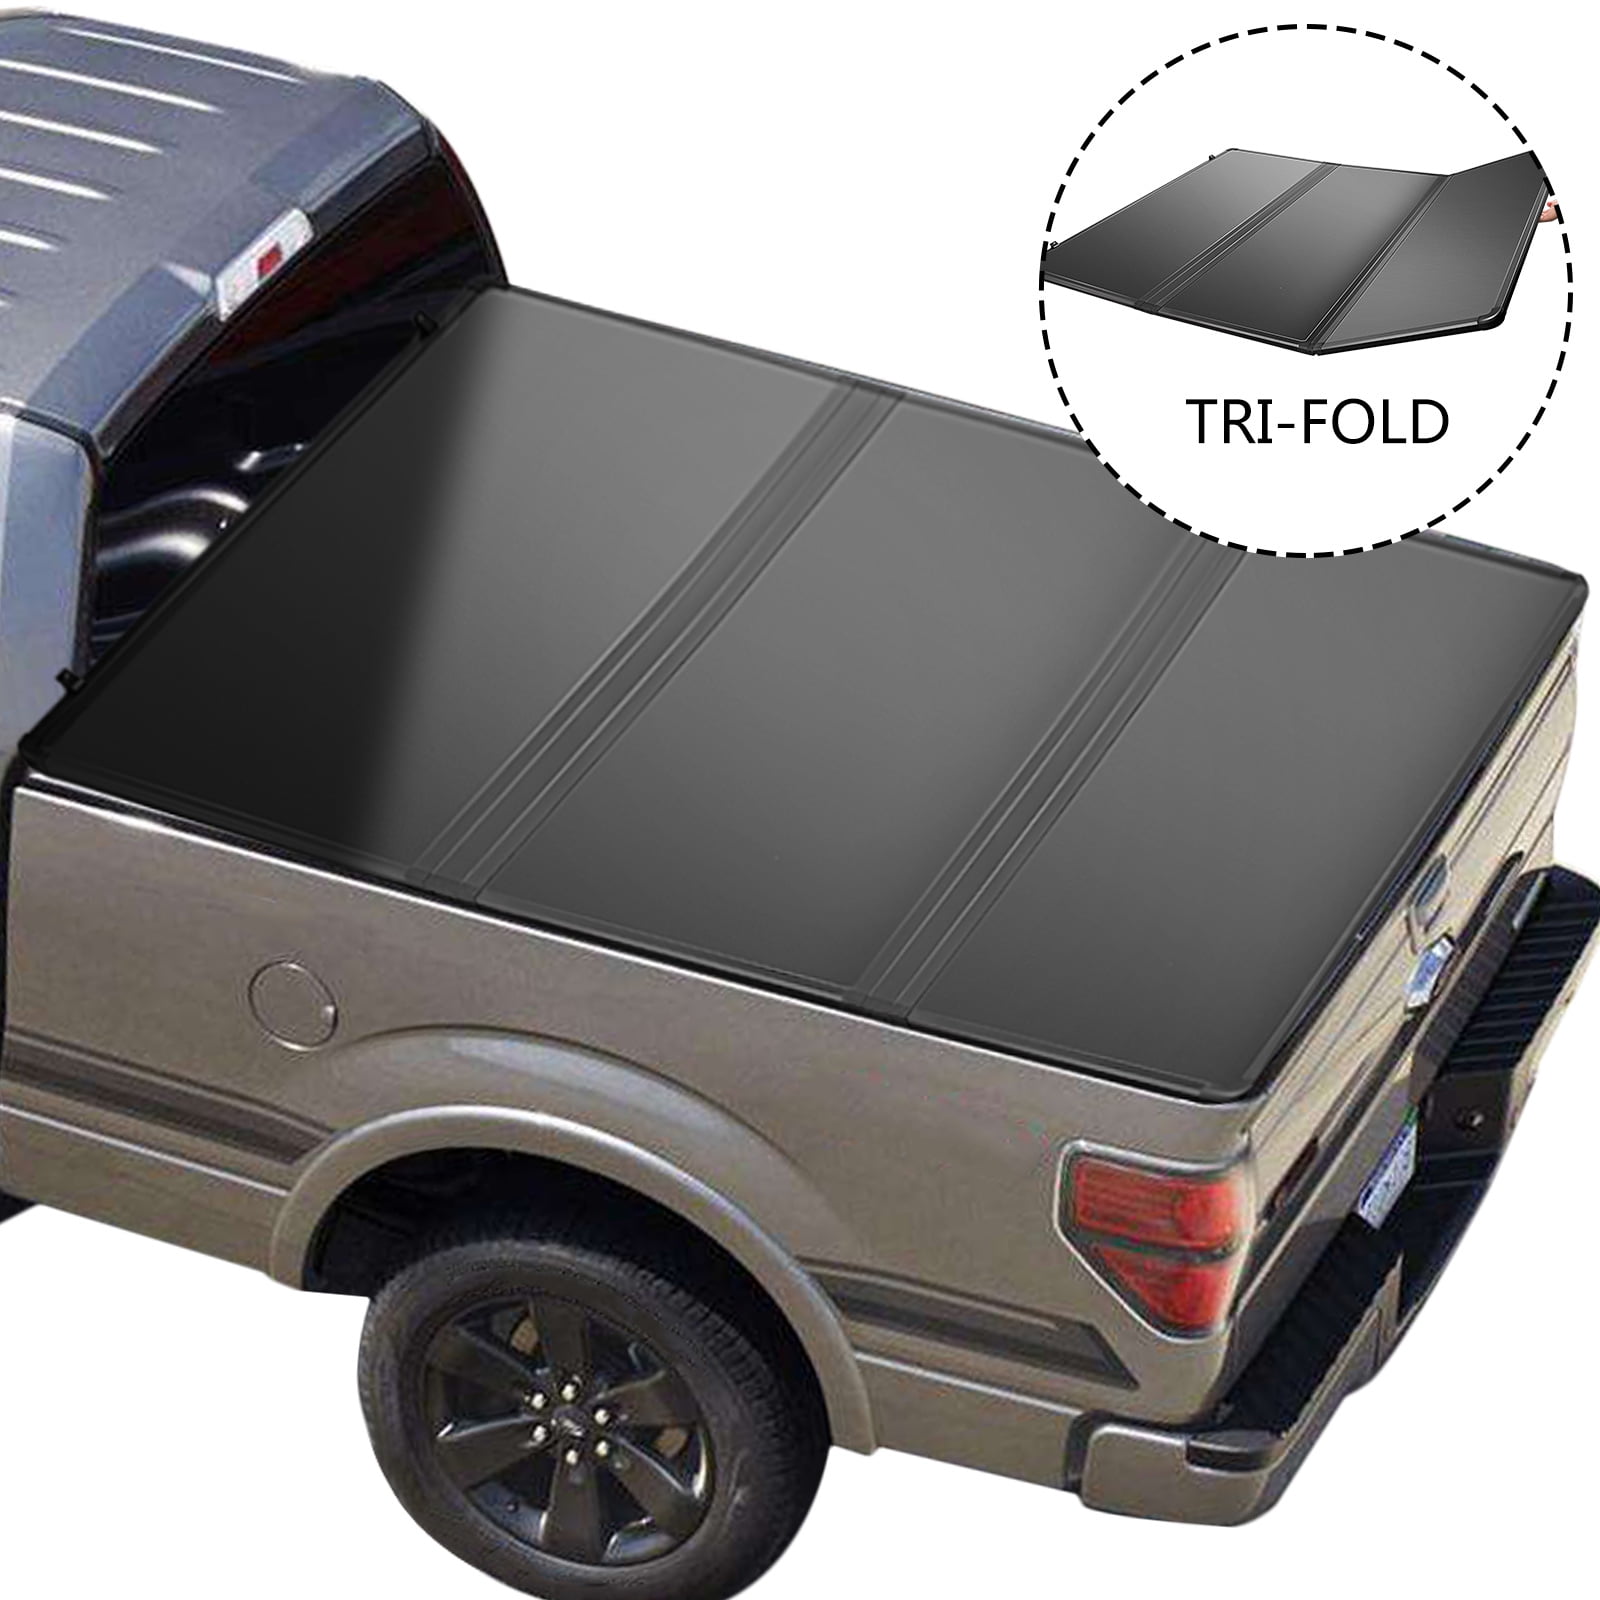 Best Truck SUV Bed Car Air Mattress Pad Ford F150 Chevy Toyota Tacoma For Seat 